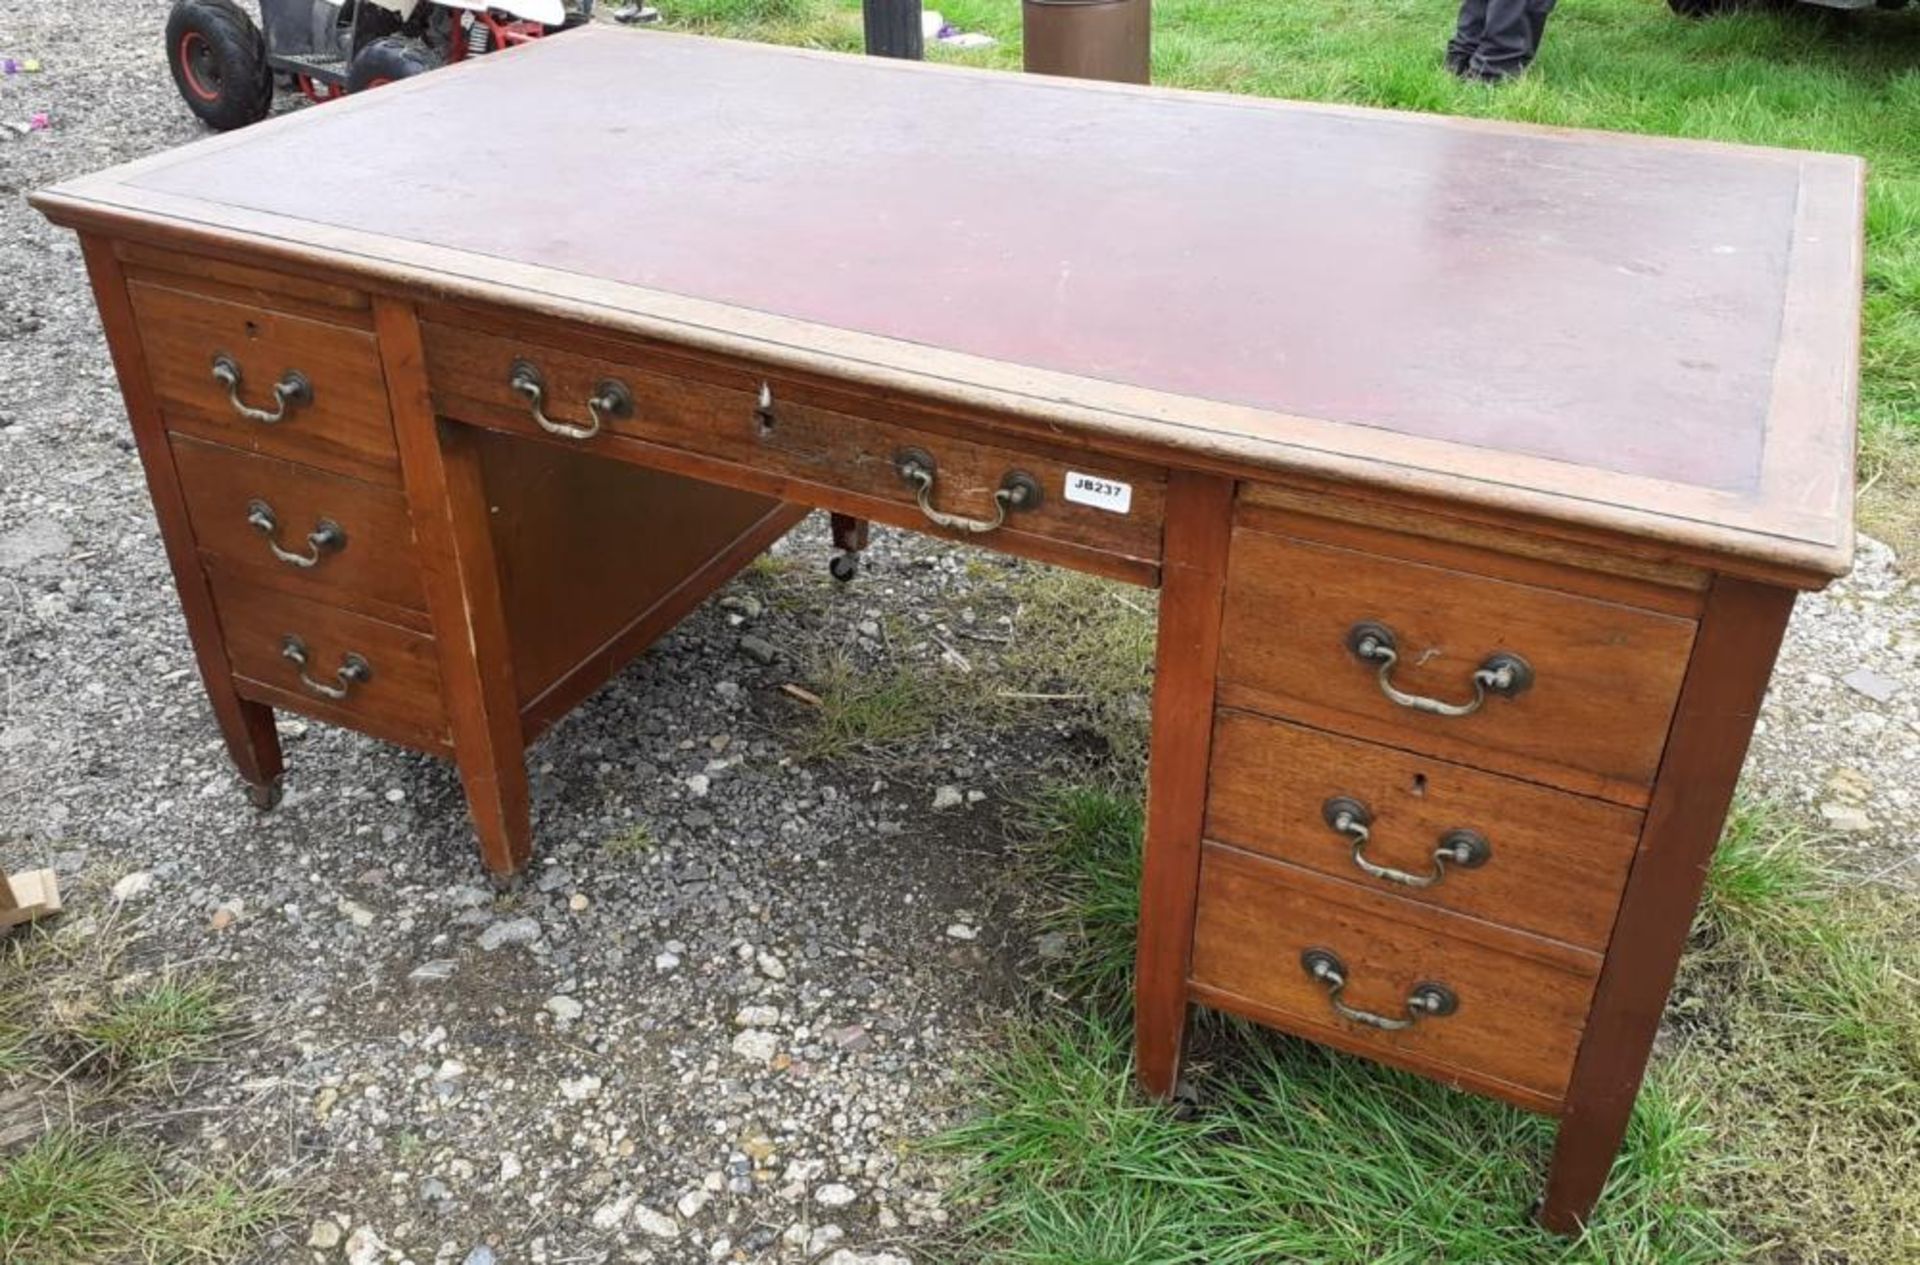 1 x Large Original Writing Desk With Leather Top Pad And Deep Drawers With Original Castors Under - Image 8 of 13